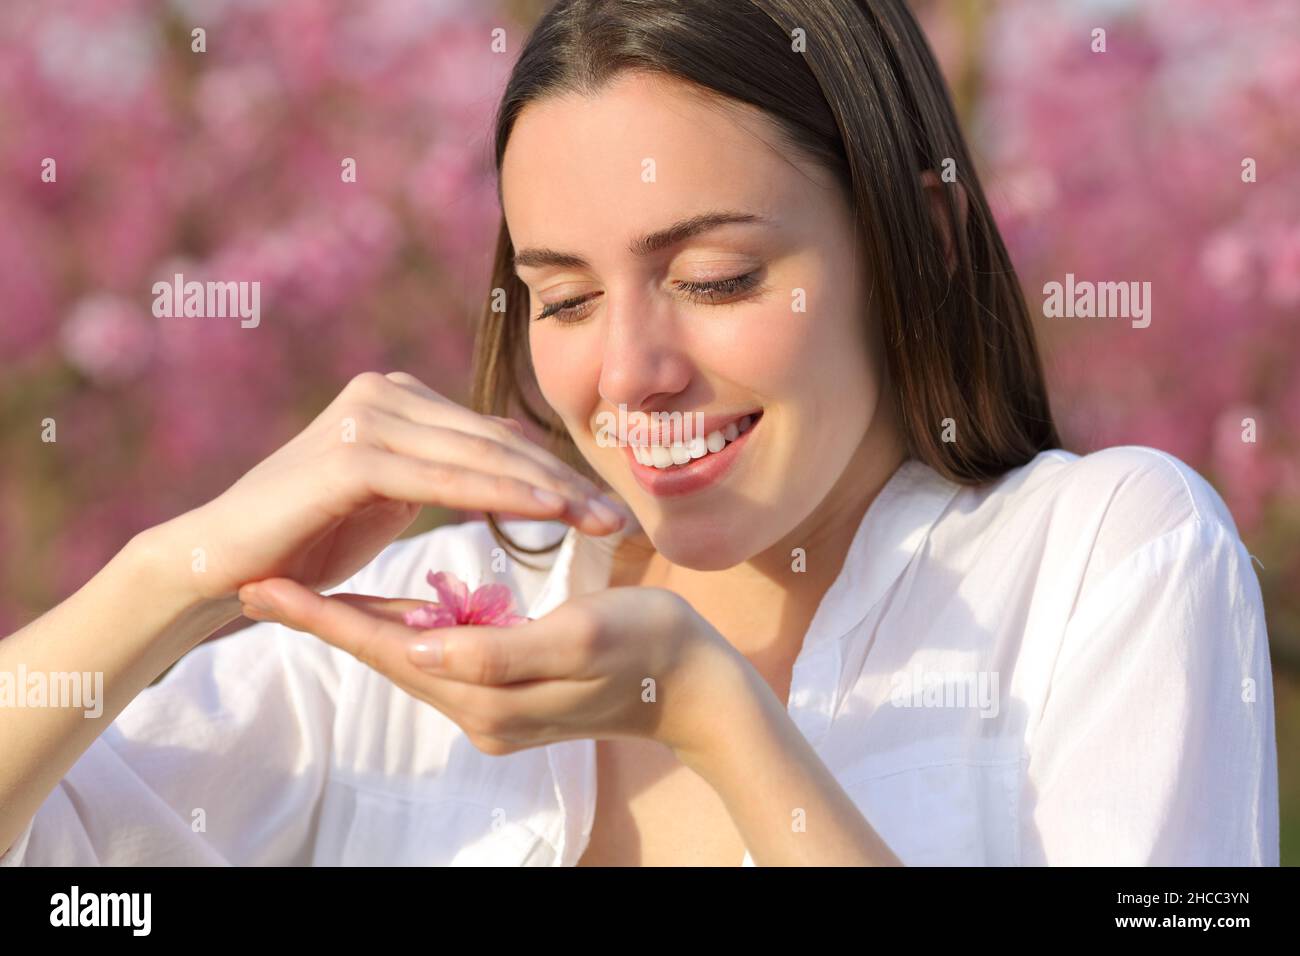 Happy woman holding and protecting flower in a pink field Stock Photo